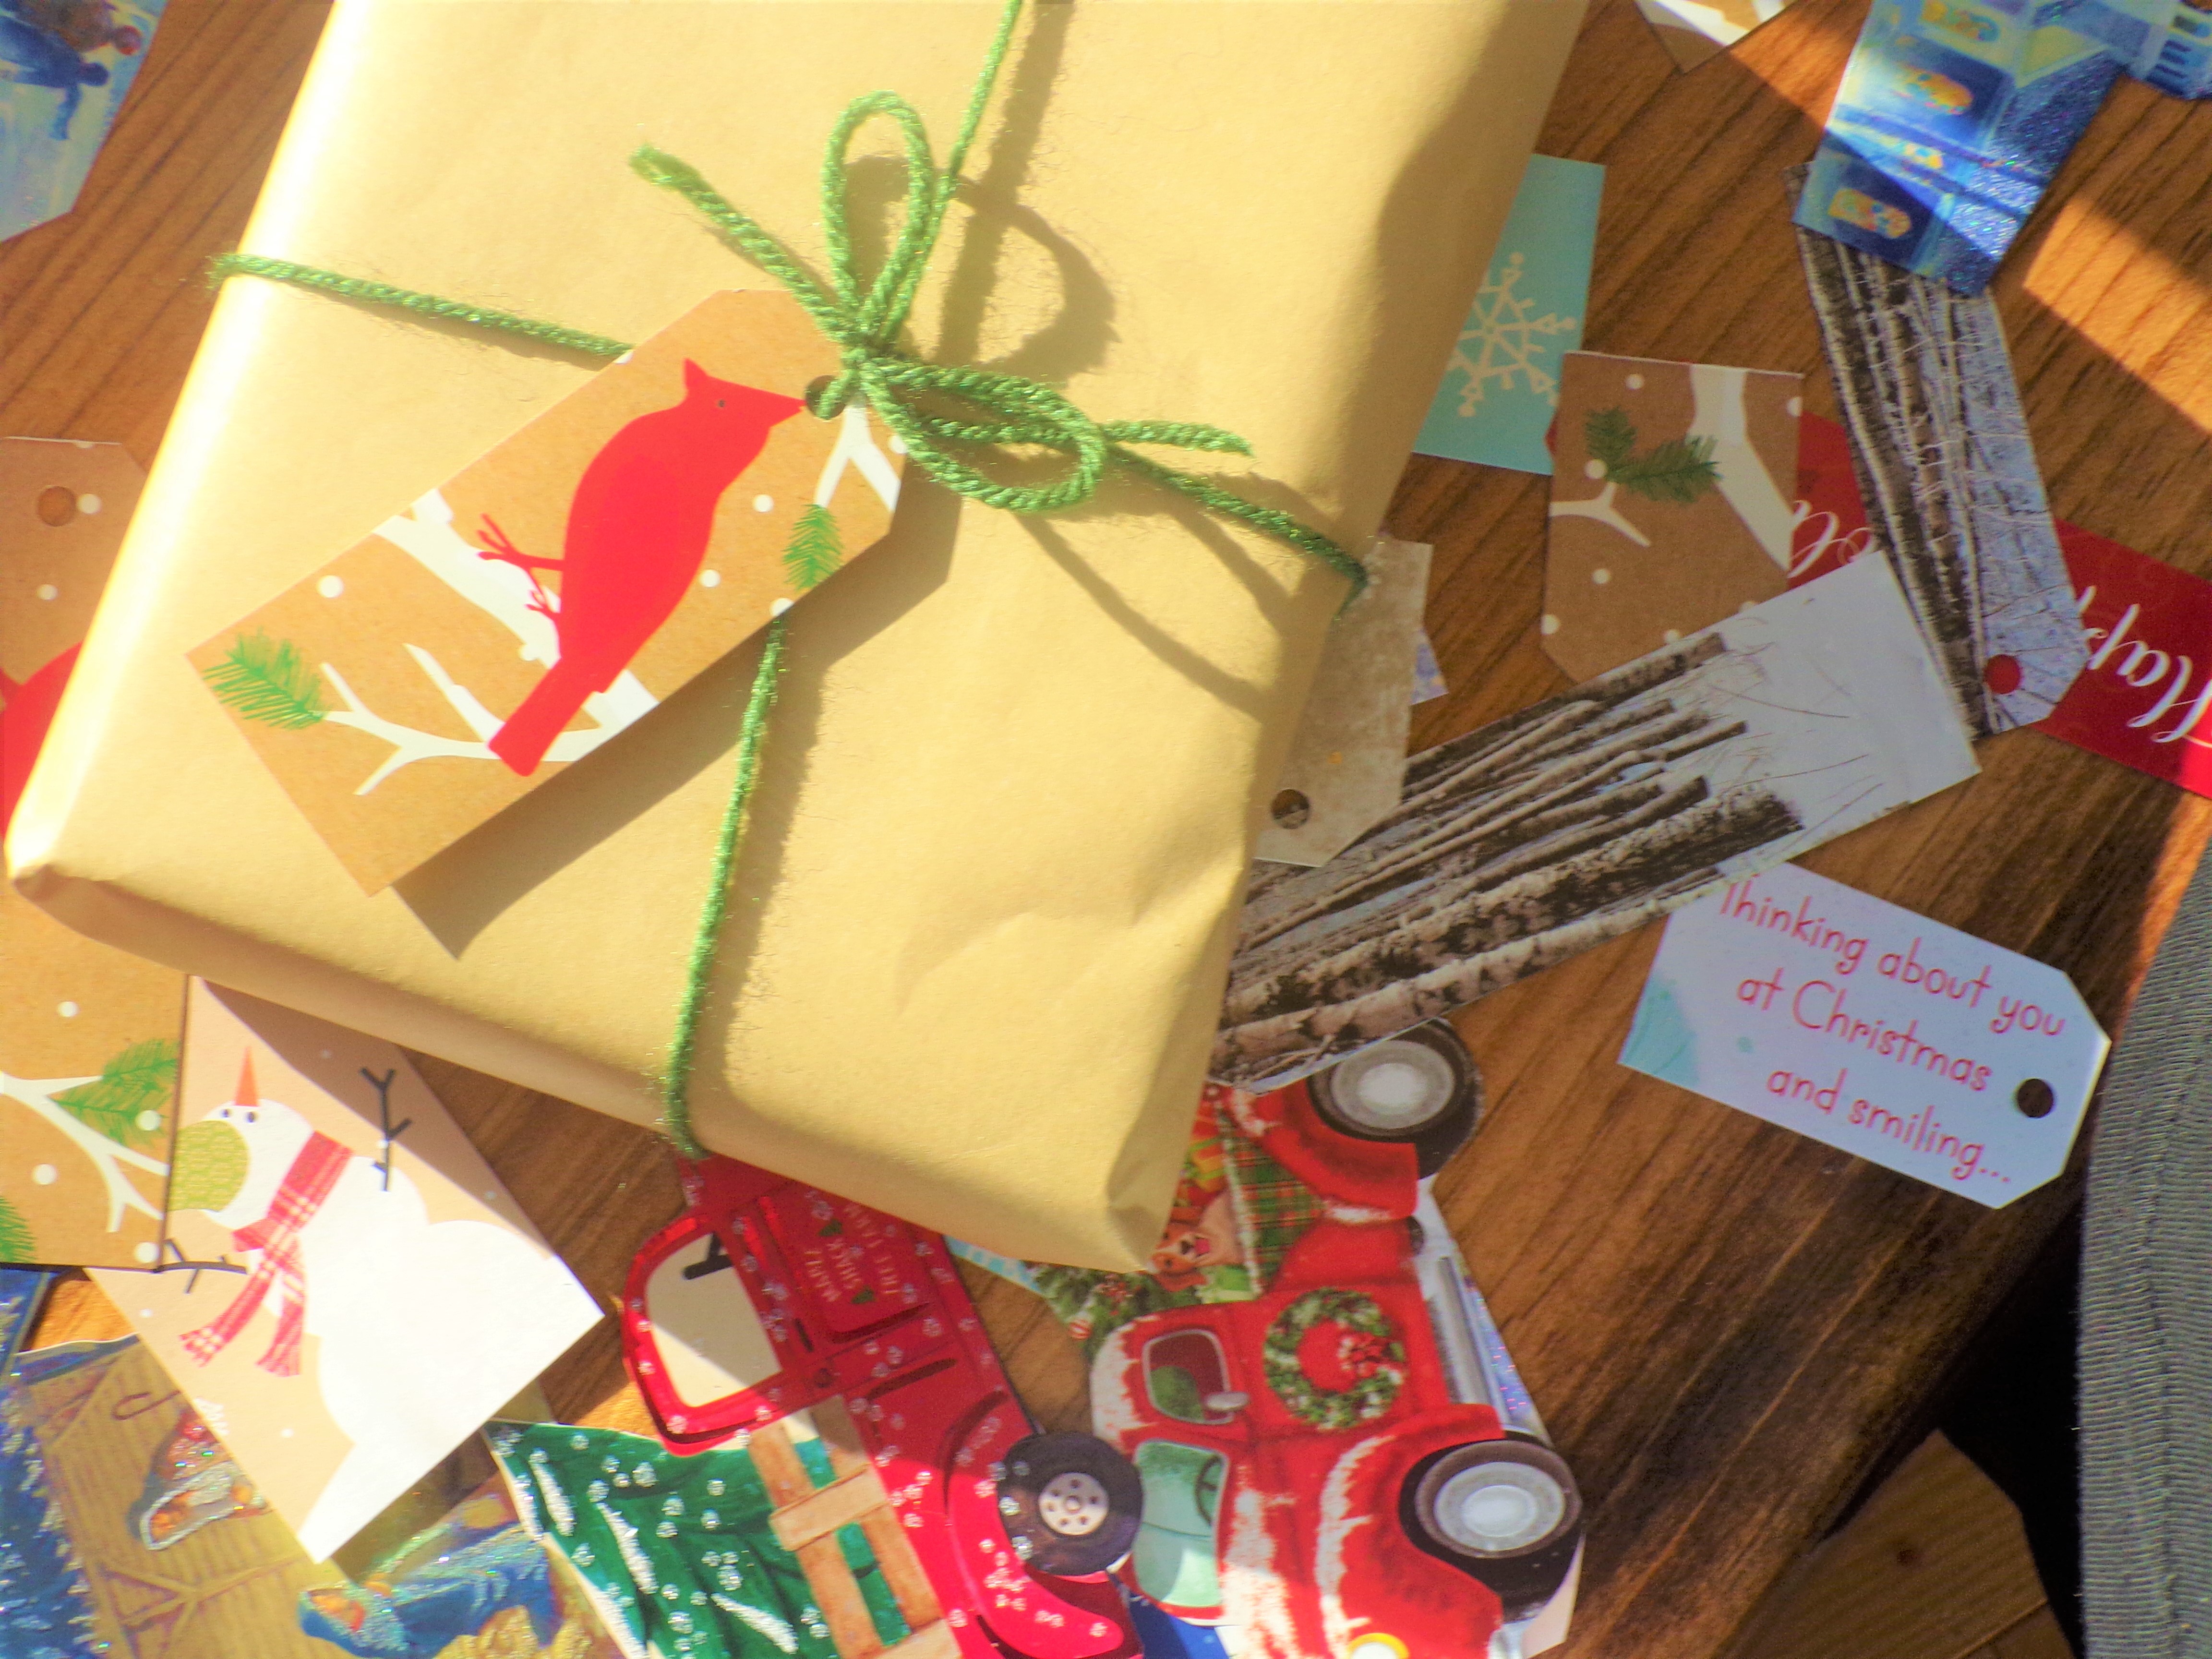 a handmade gift sits on top of handmade diy gift tags made from repurposed cards